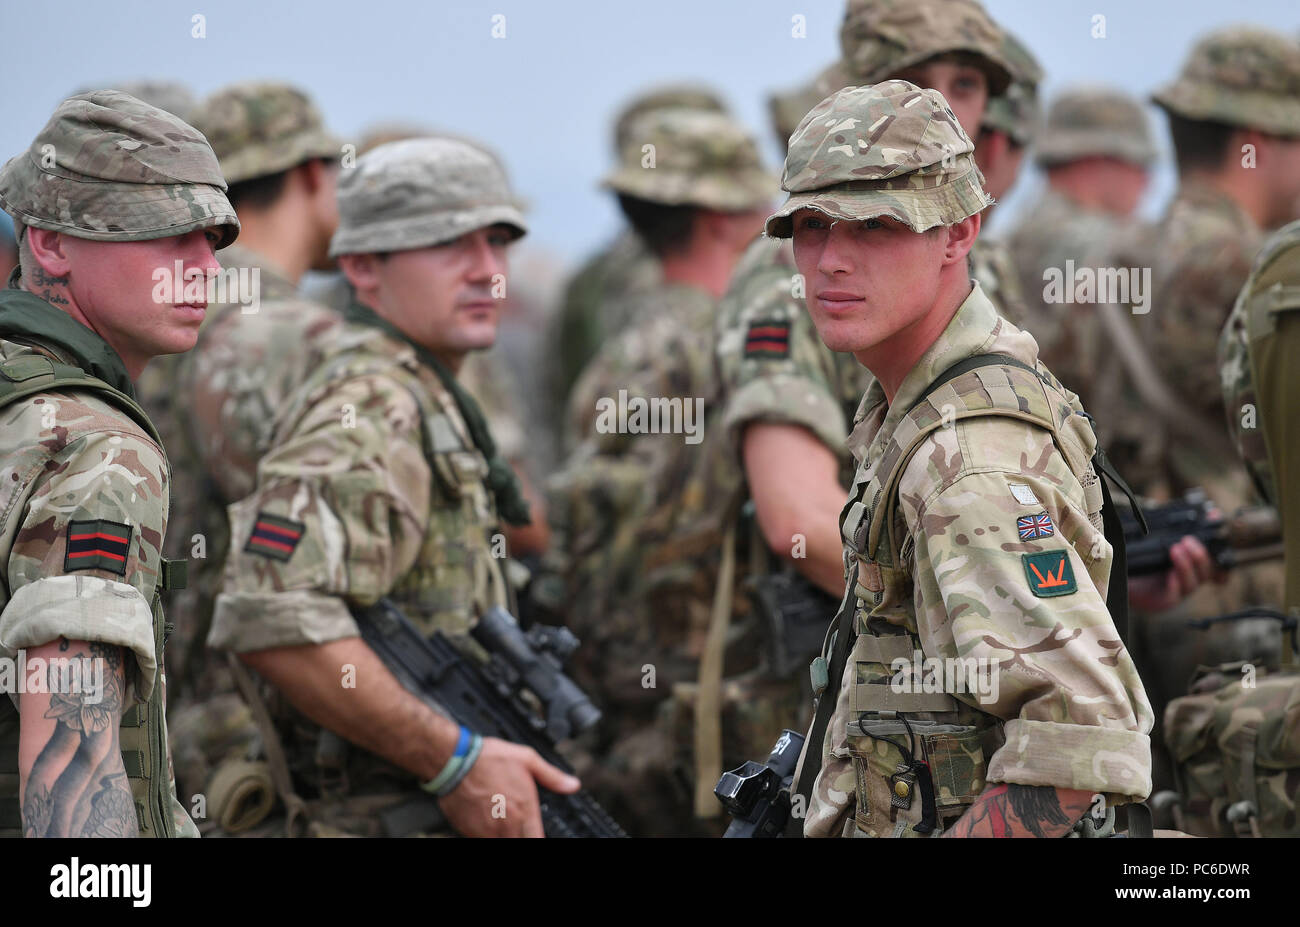 Tbilisi, Georgia. 1st Aug, 2018. Soldiers take part in the multinational military drill named 'Noble Partner 2018' at Vaziani base near Tbilisi, Georgia, Aug. 1, 2018. The 13-nation military exercise 'Noble Partner 2018' kicked off in Georgia's Vaziani military base on Wednesday with over 3,000 soldiers taking part, the Georgian Defense Ministry said. Armenia, Azerbaijan, Britain, Estonia, France, Georgia, Germany, Lithuania, Norway, Poland, Turkey, Ukraine and the United States are participating in the drills which will end on Aug. 16. Credit: Kulumbegashvili Tamuna/Xinhua/Alamy Live News Stock Photo